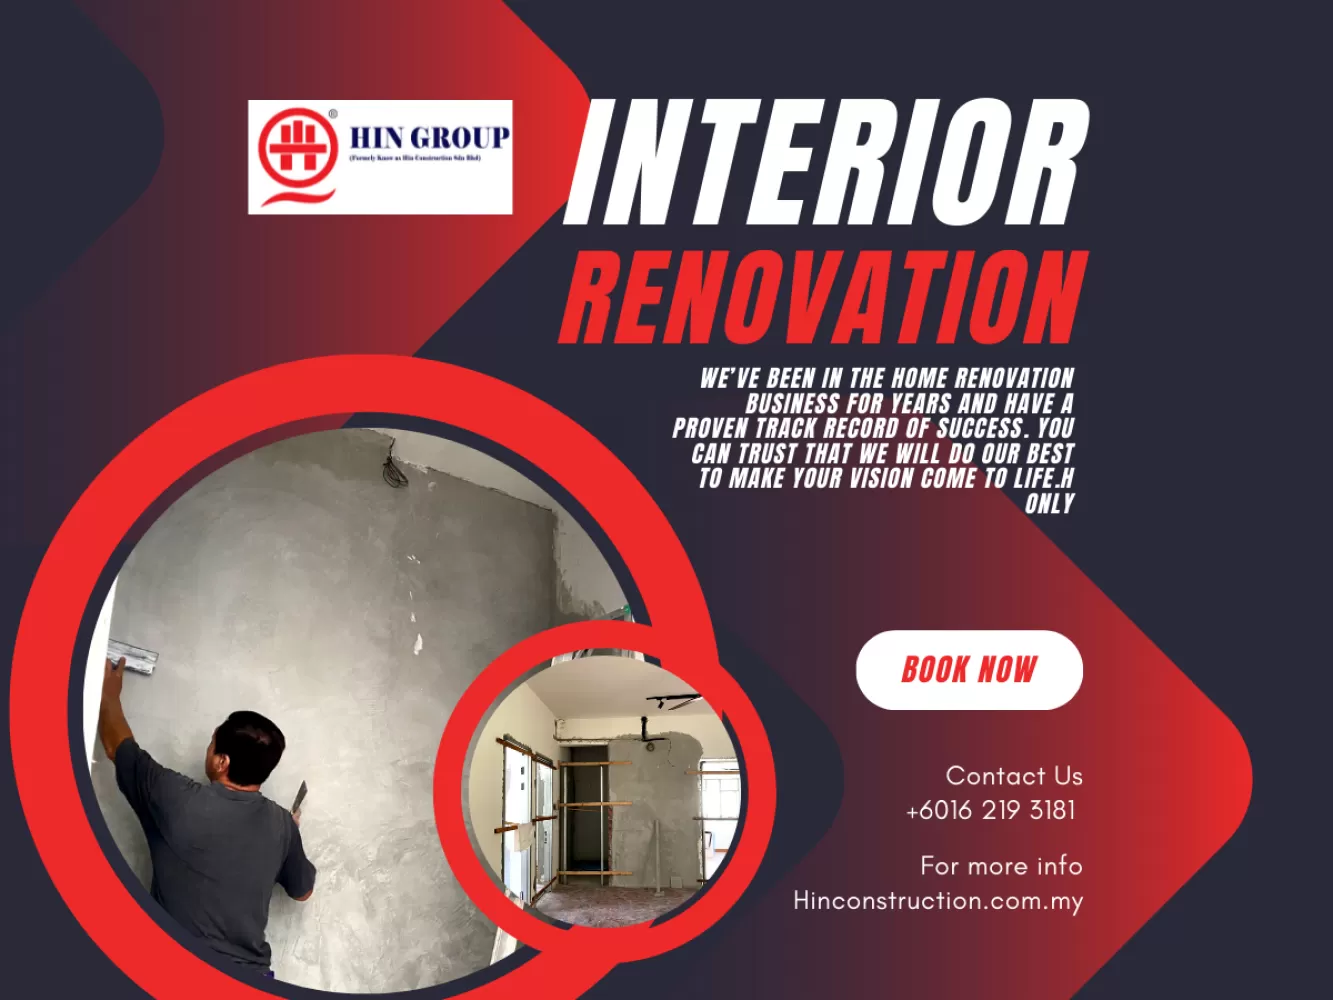 Home Renovation Contractor - Get Your Free Consultation Now